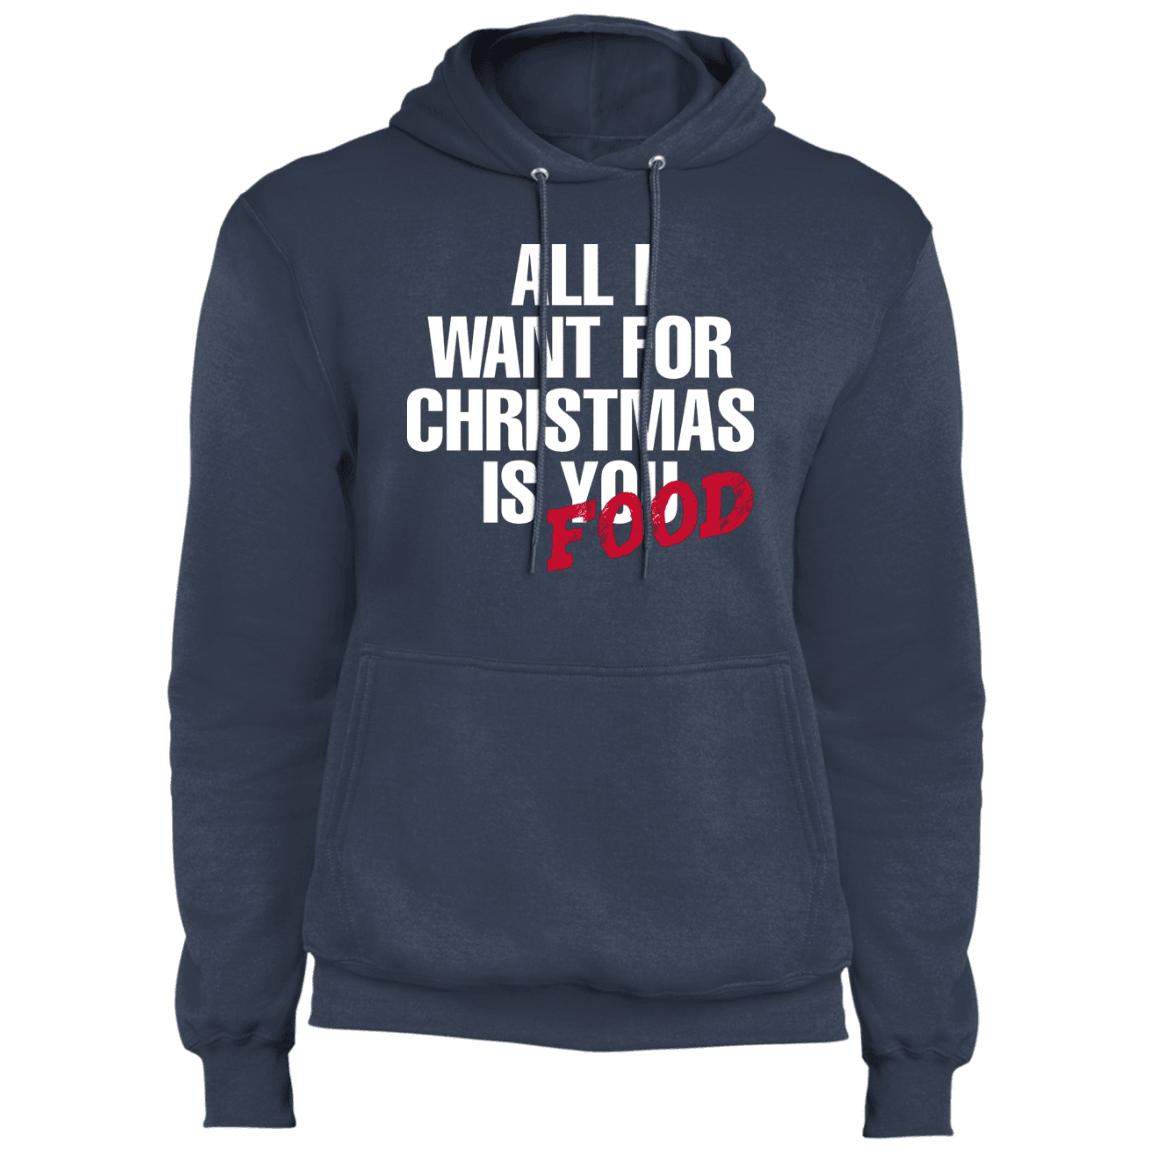 Designs by MyUtopia Shout Out:All I Want For Christmas Is Food - Core Fleece Unisex Pullover Hoodie,Navy / S,Sweatshirts